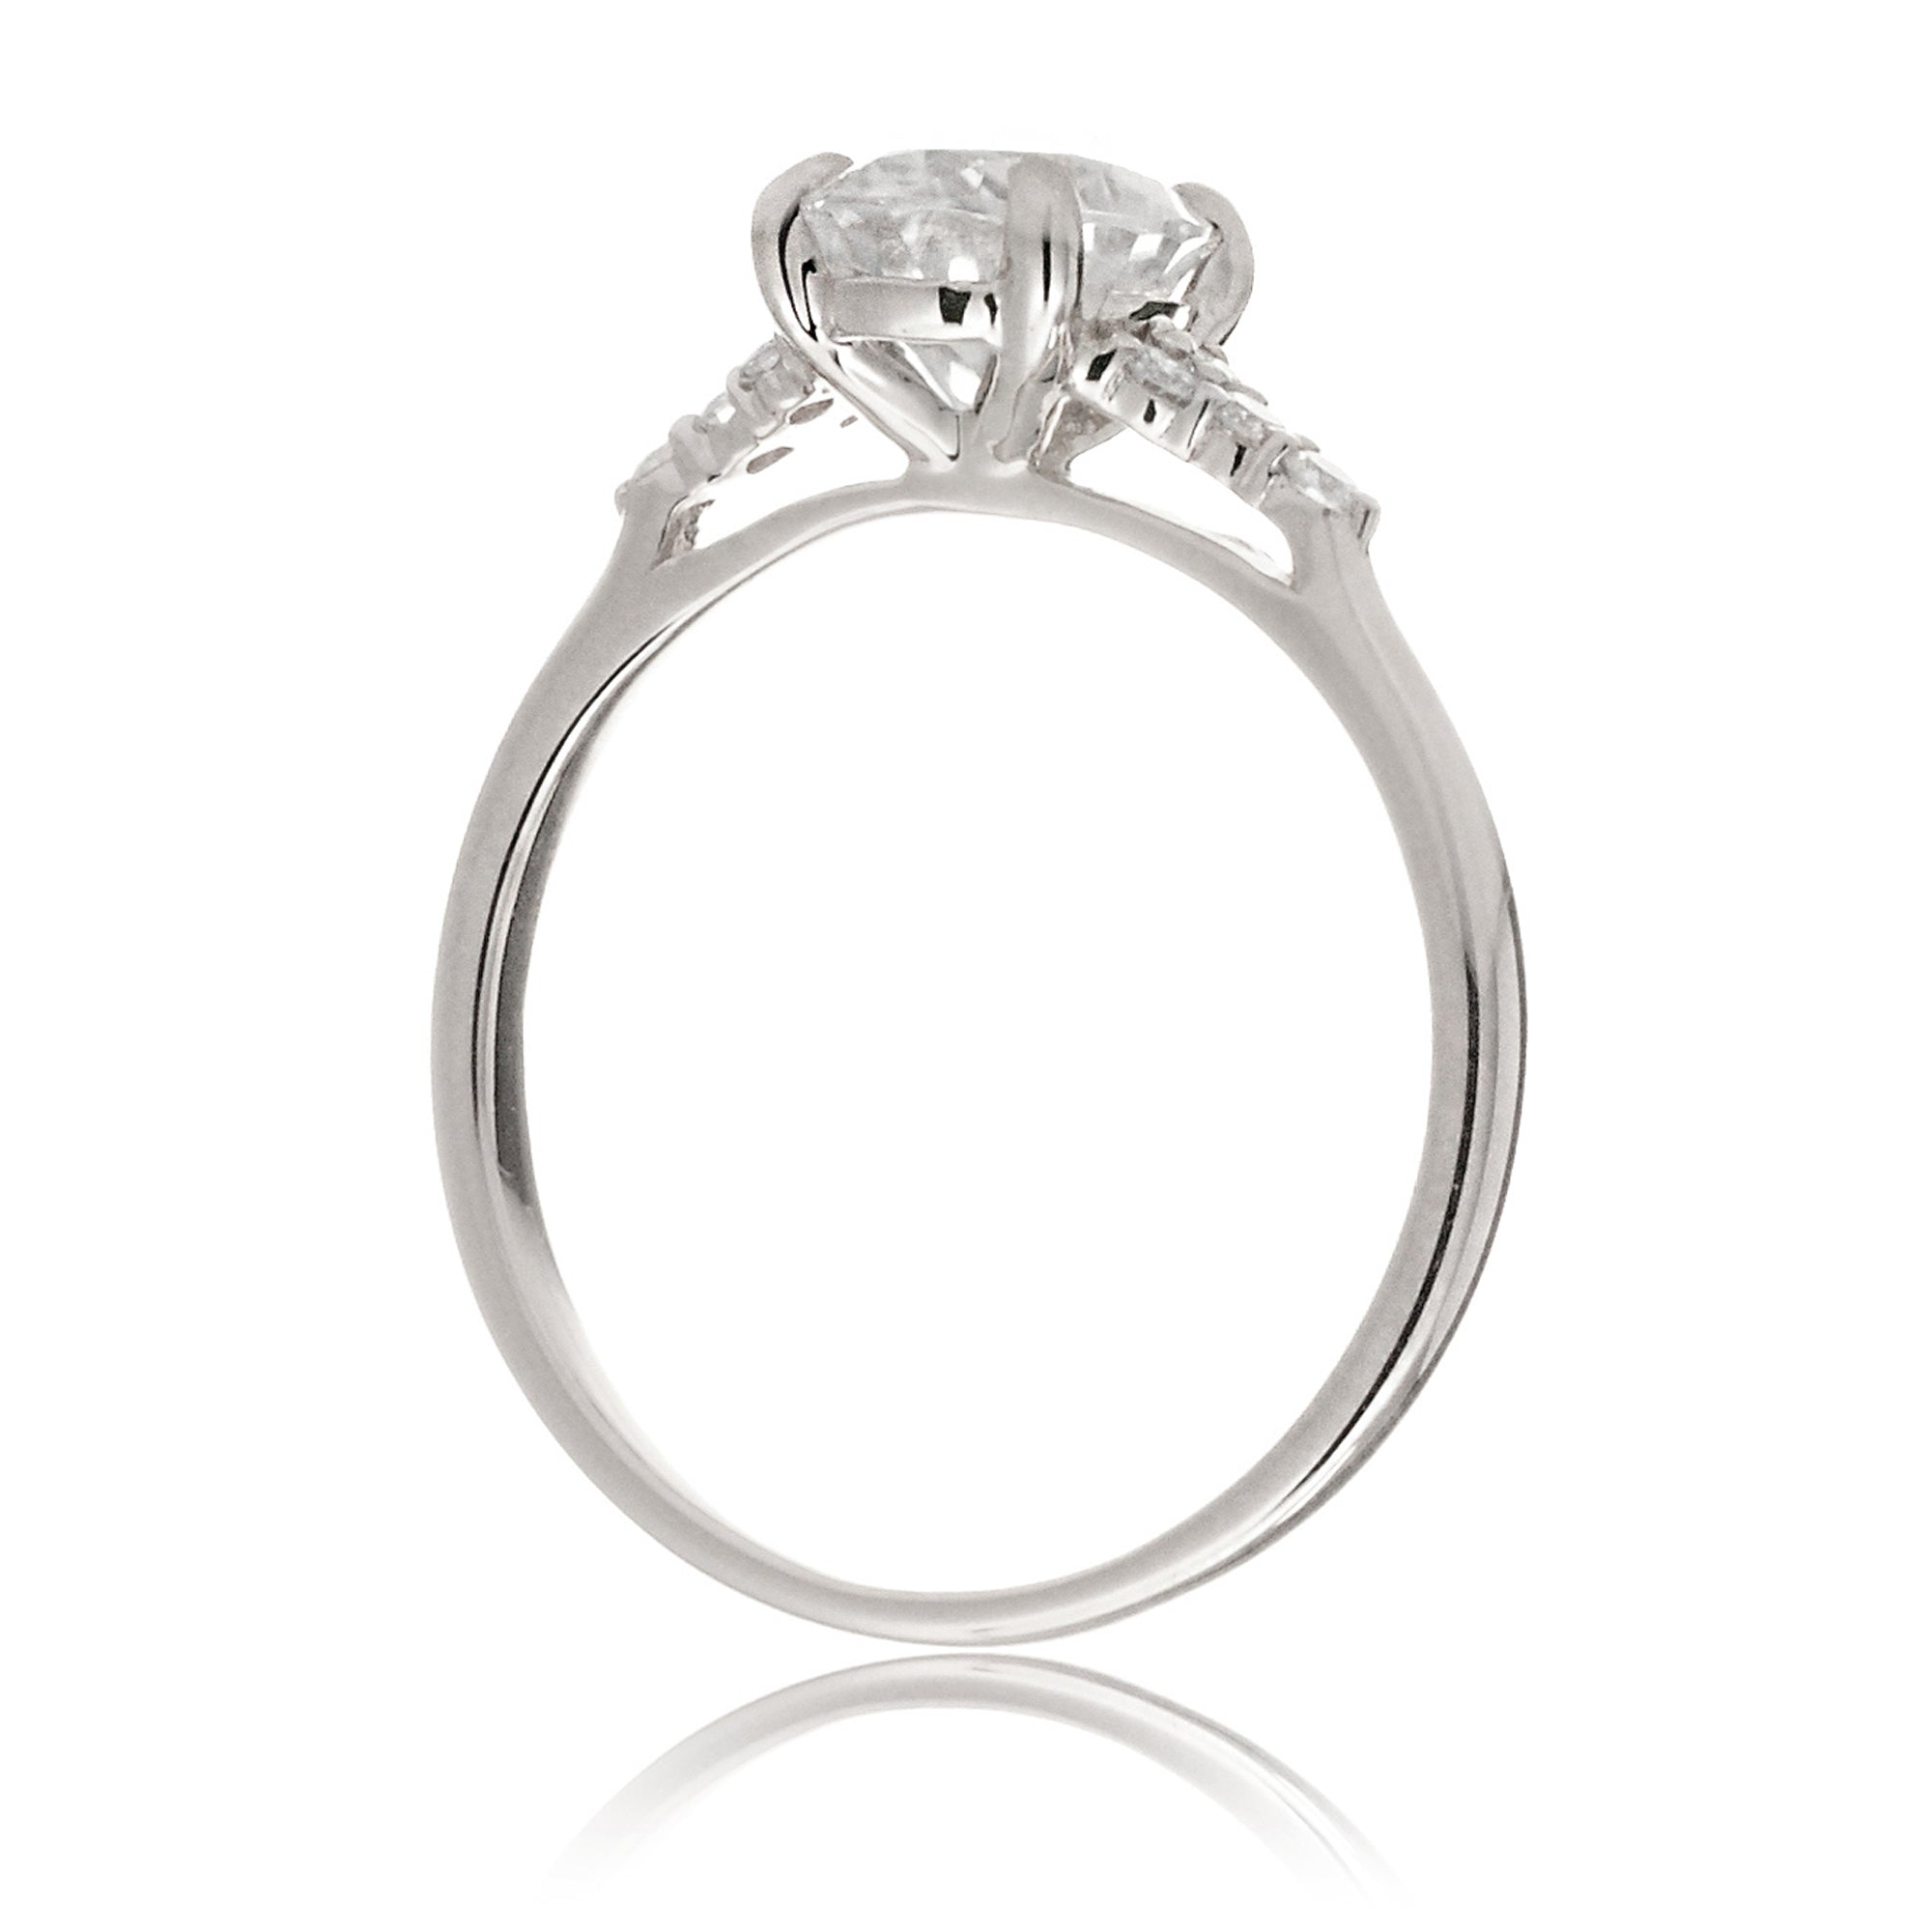  Pear moissanite ring with diamond accent on white gold - the Chloe